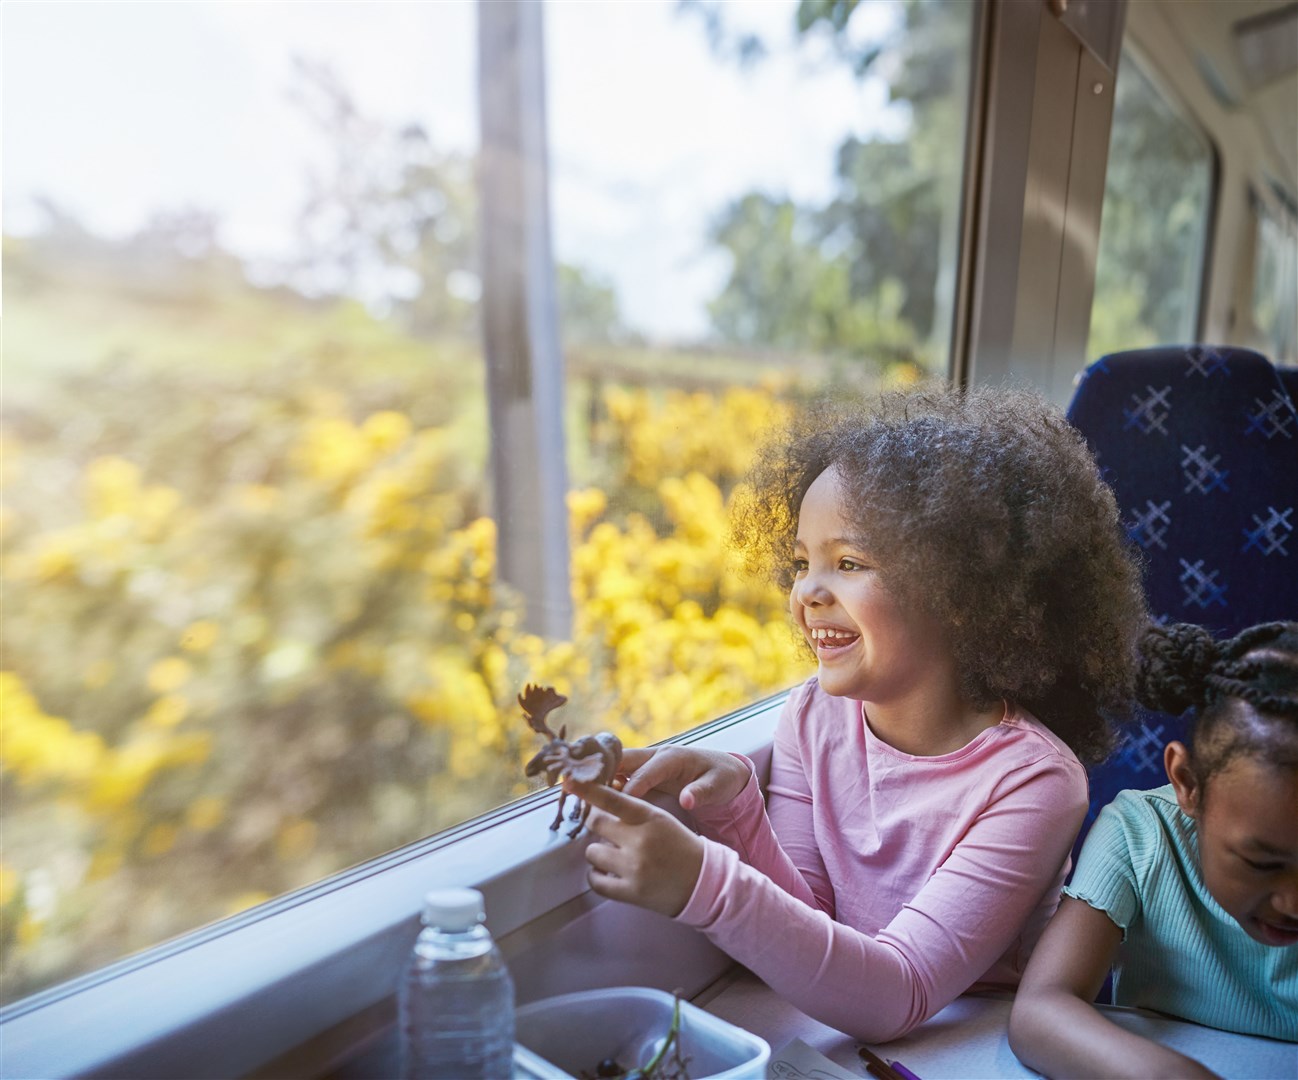 ScotRail is flagging up the offer ahead of the school summer holidays. Picture: ScotRail